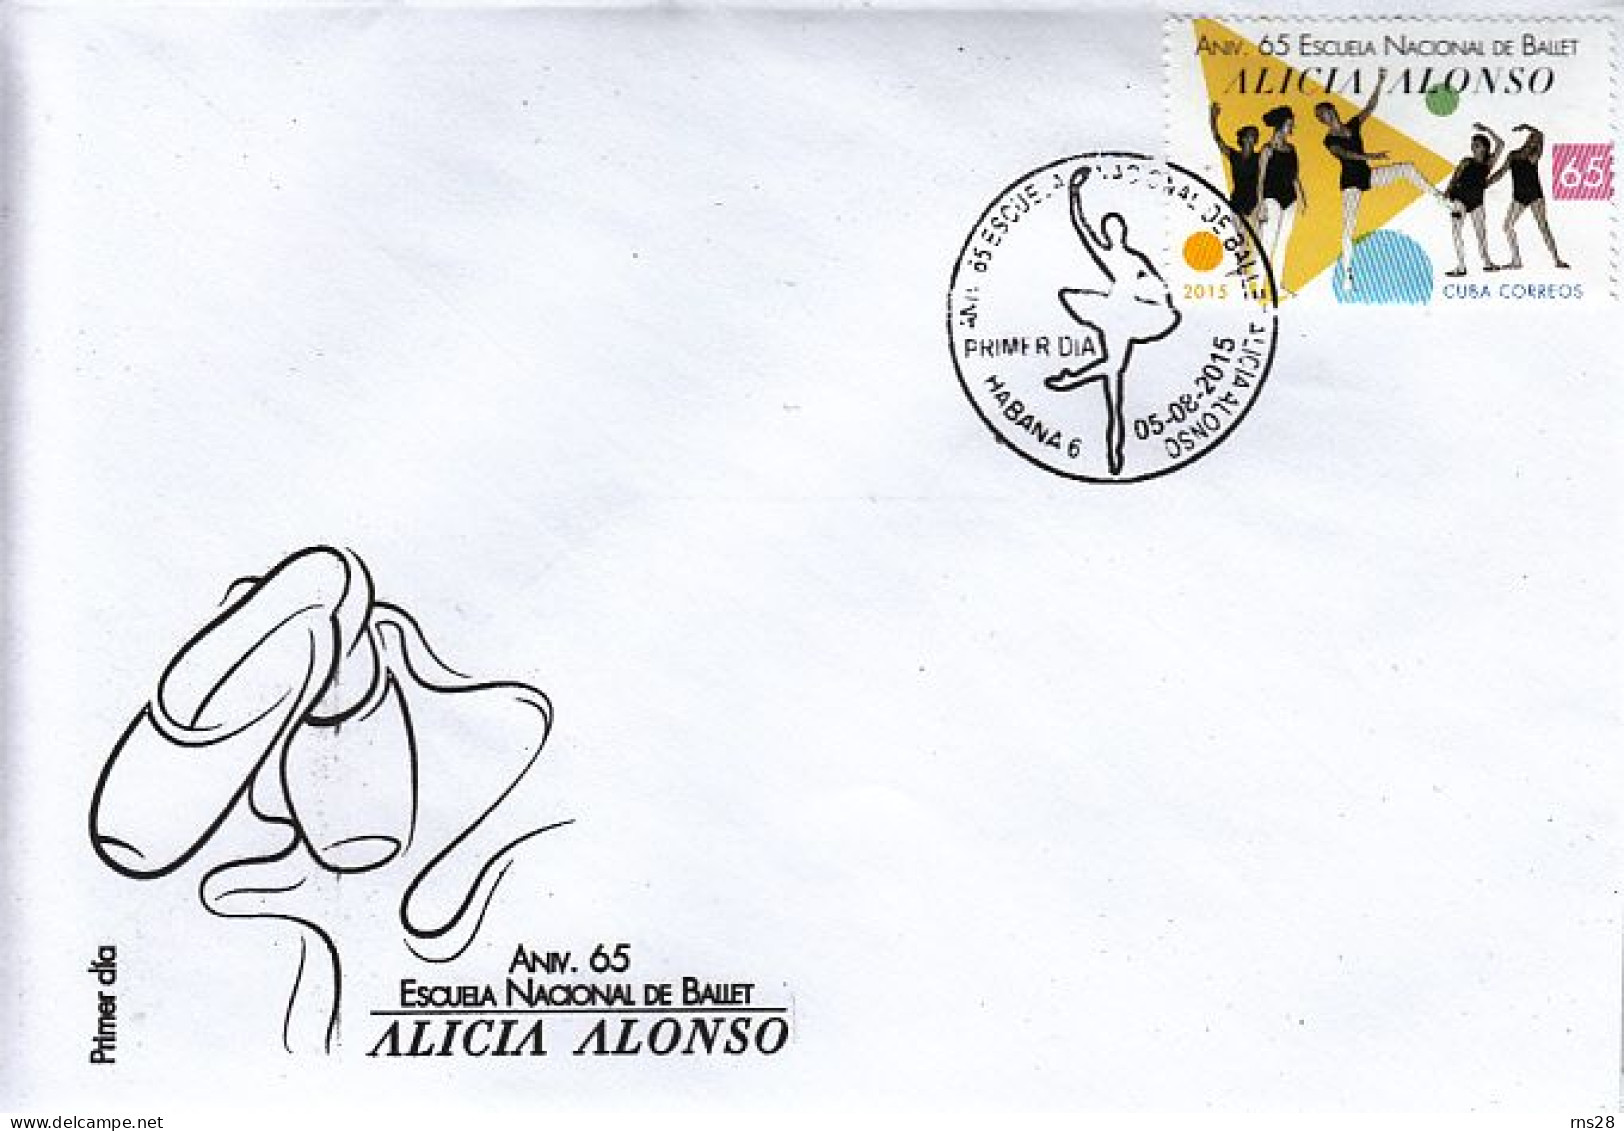 CUBA 2015  FDC Sc 5712  Alicia Alonso Ballet - Covers & Documents